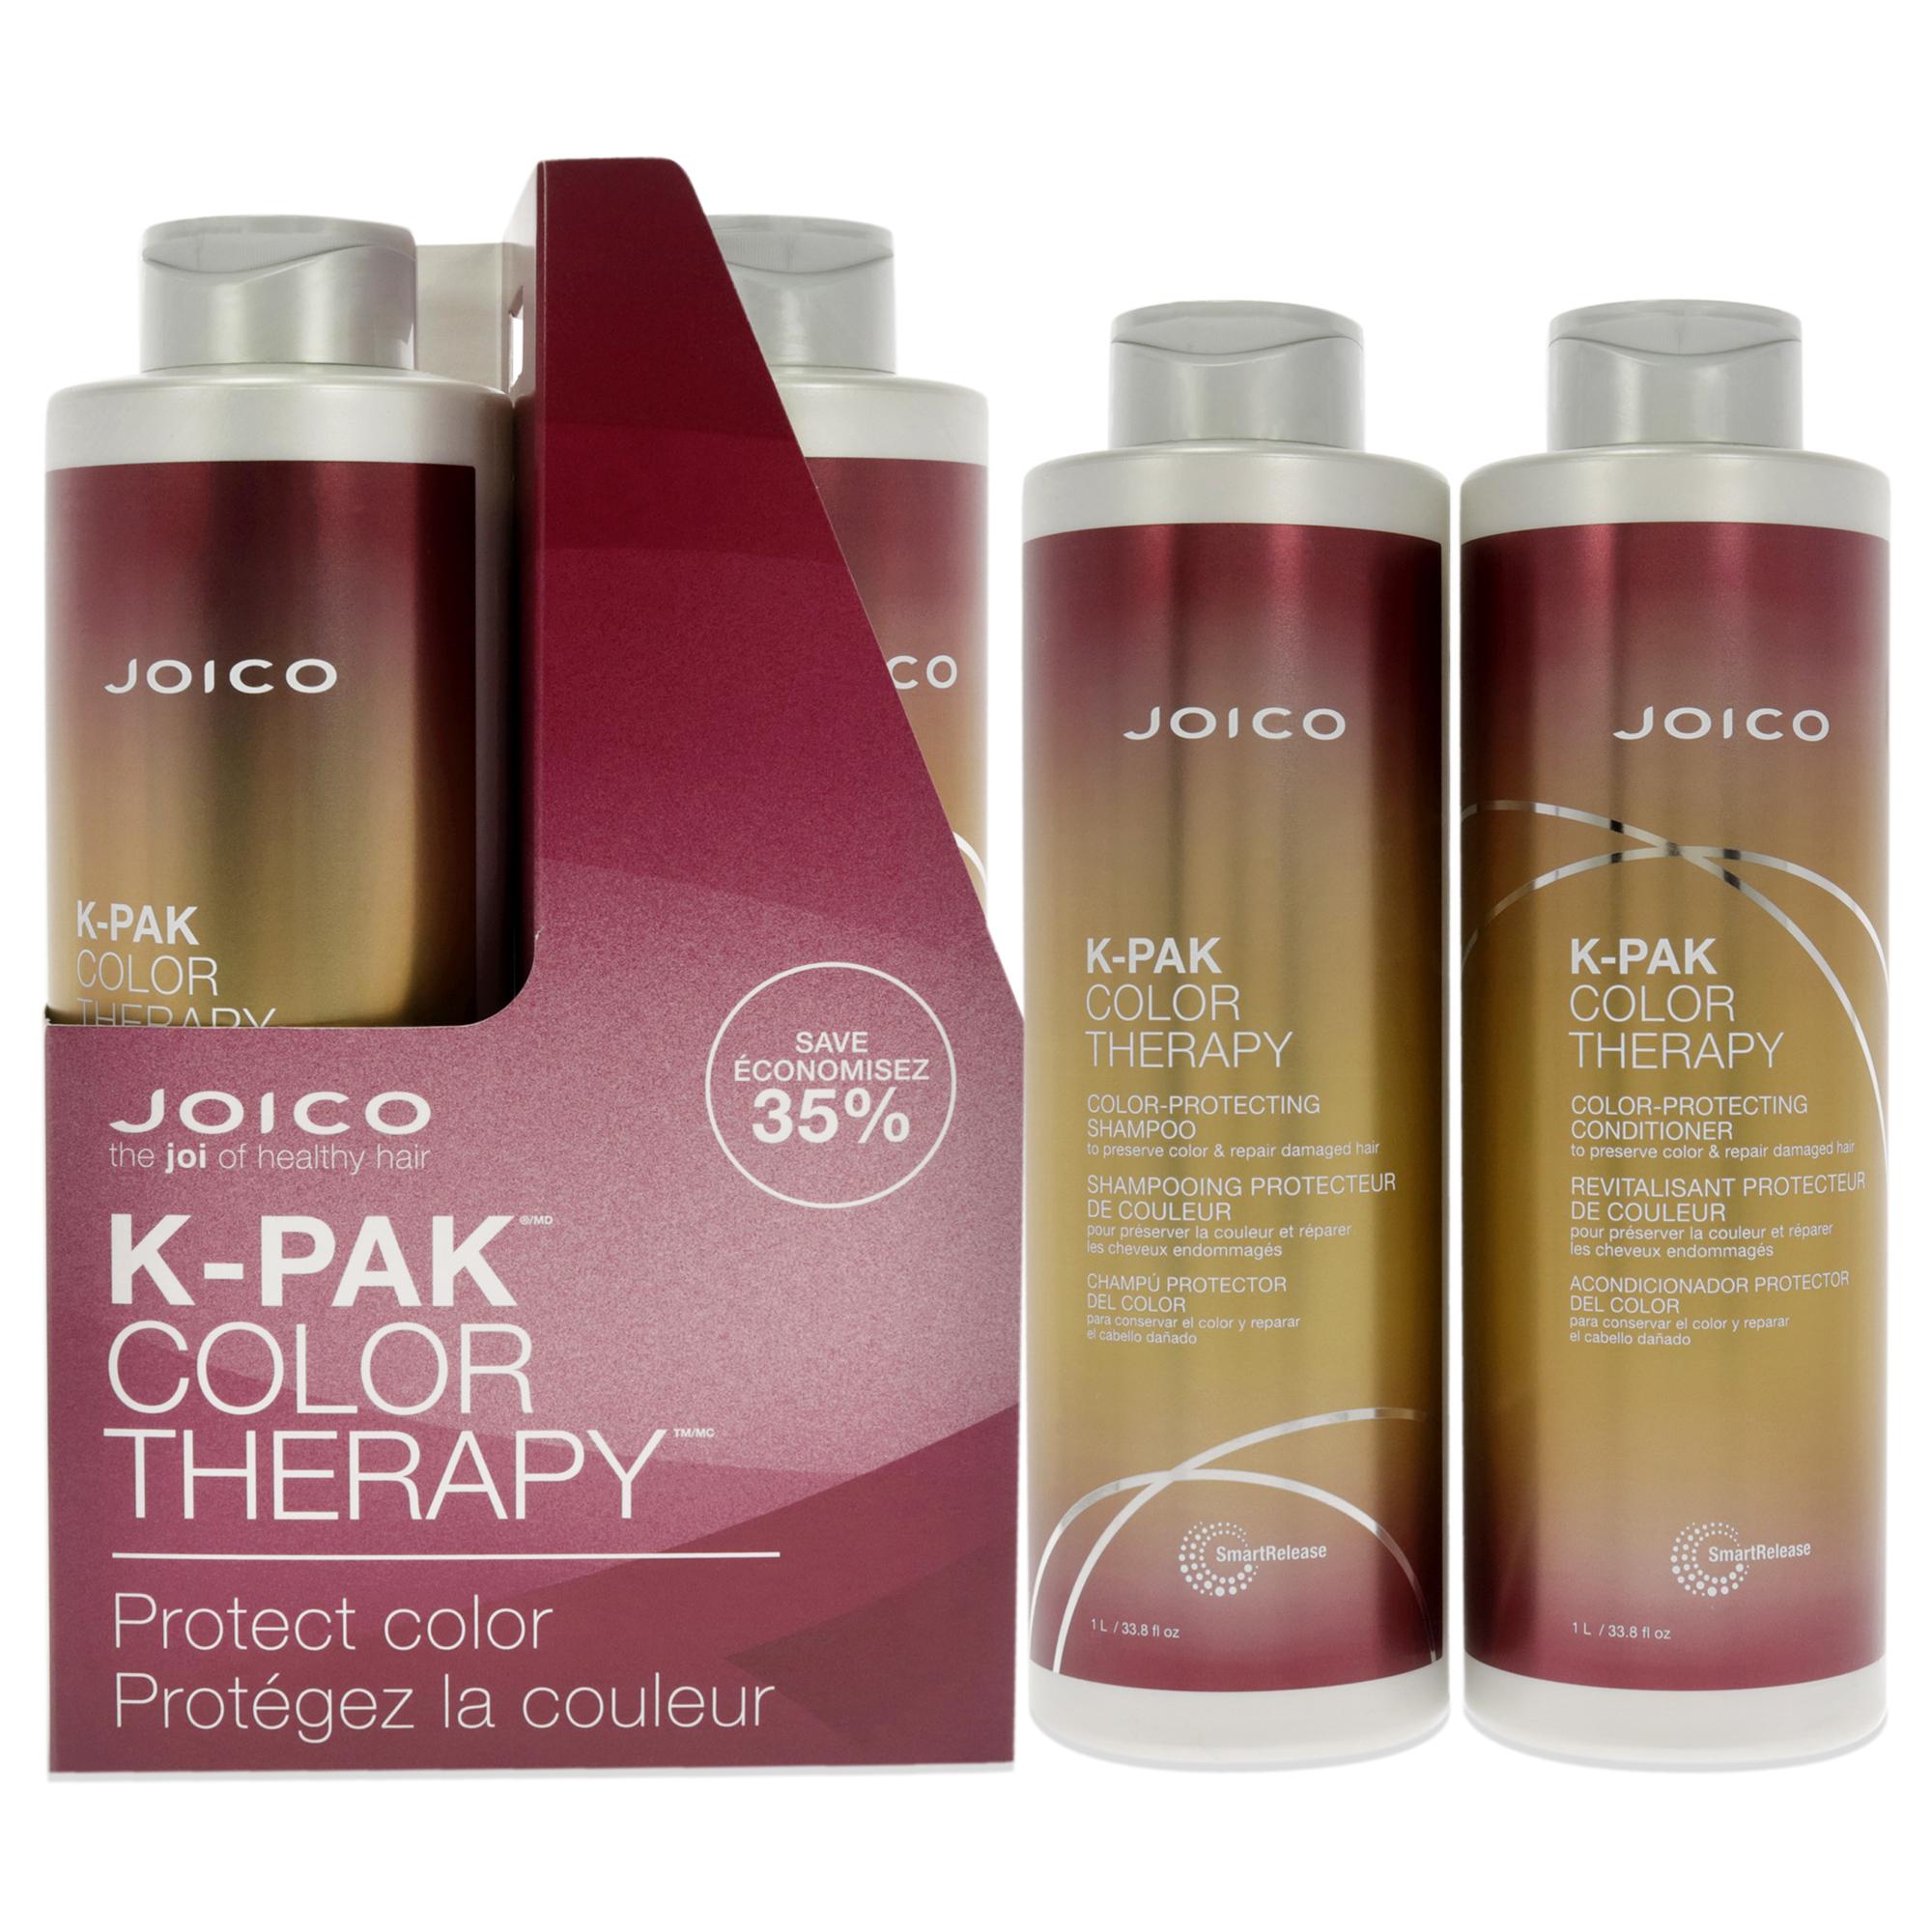 K-Pak Color Therapy kit by Joico for Unisex - 2 Pc Kit 33.8 oz Shampoo, 33.8 oz Conditioner - image 1 of 6